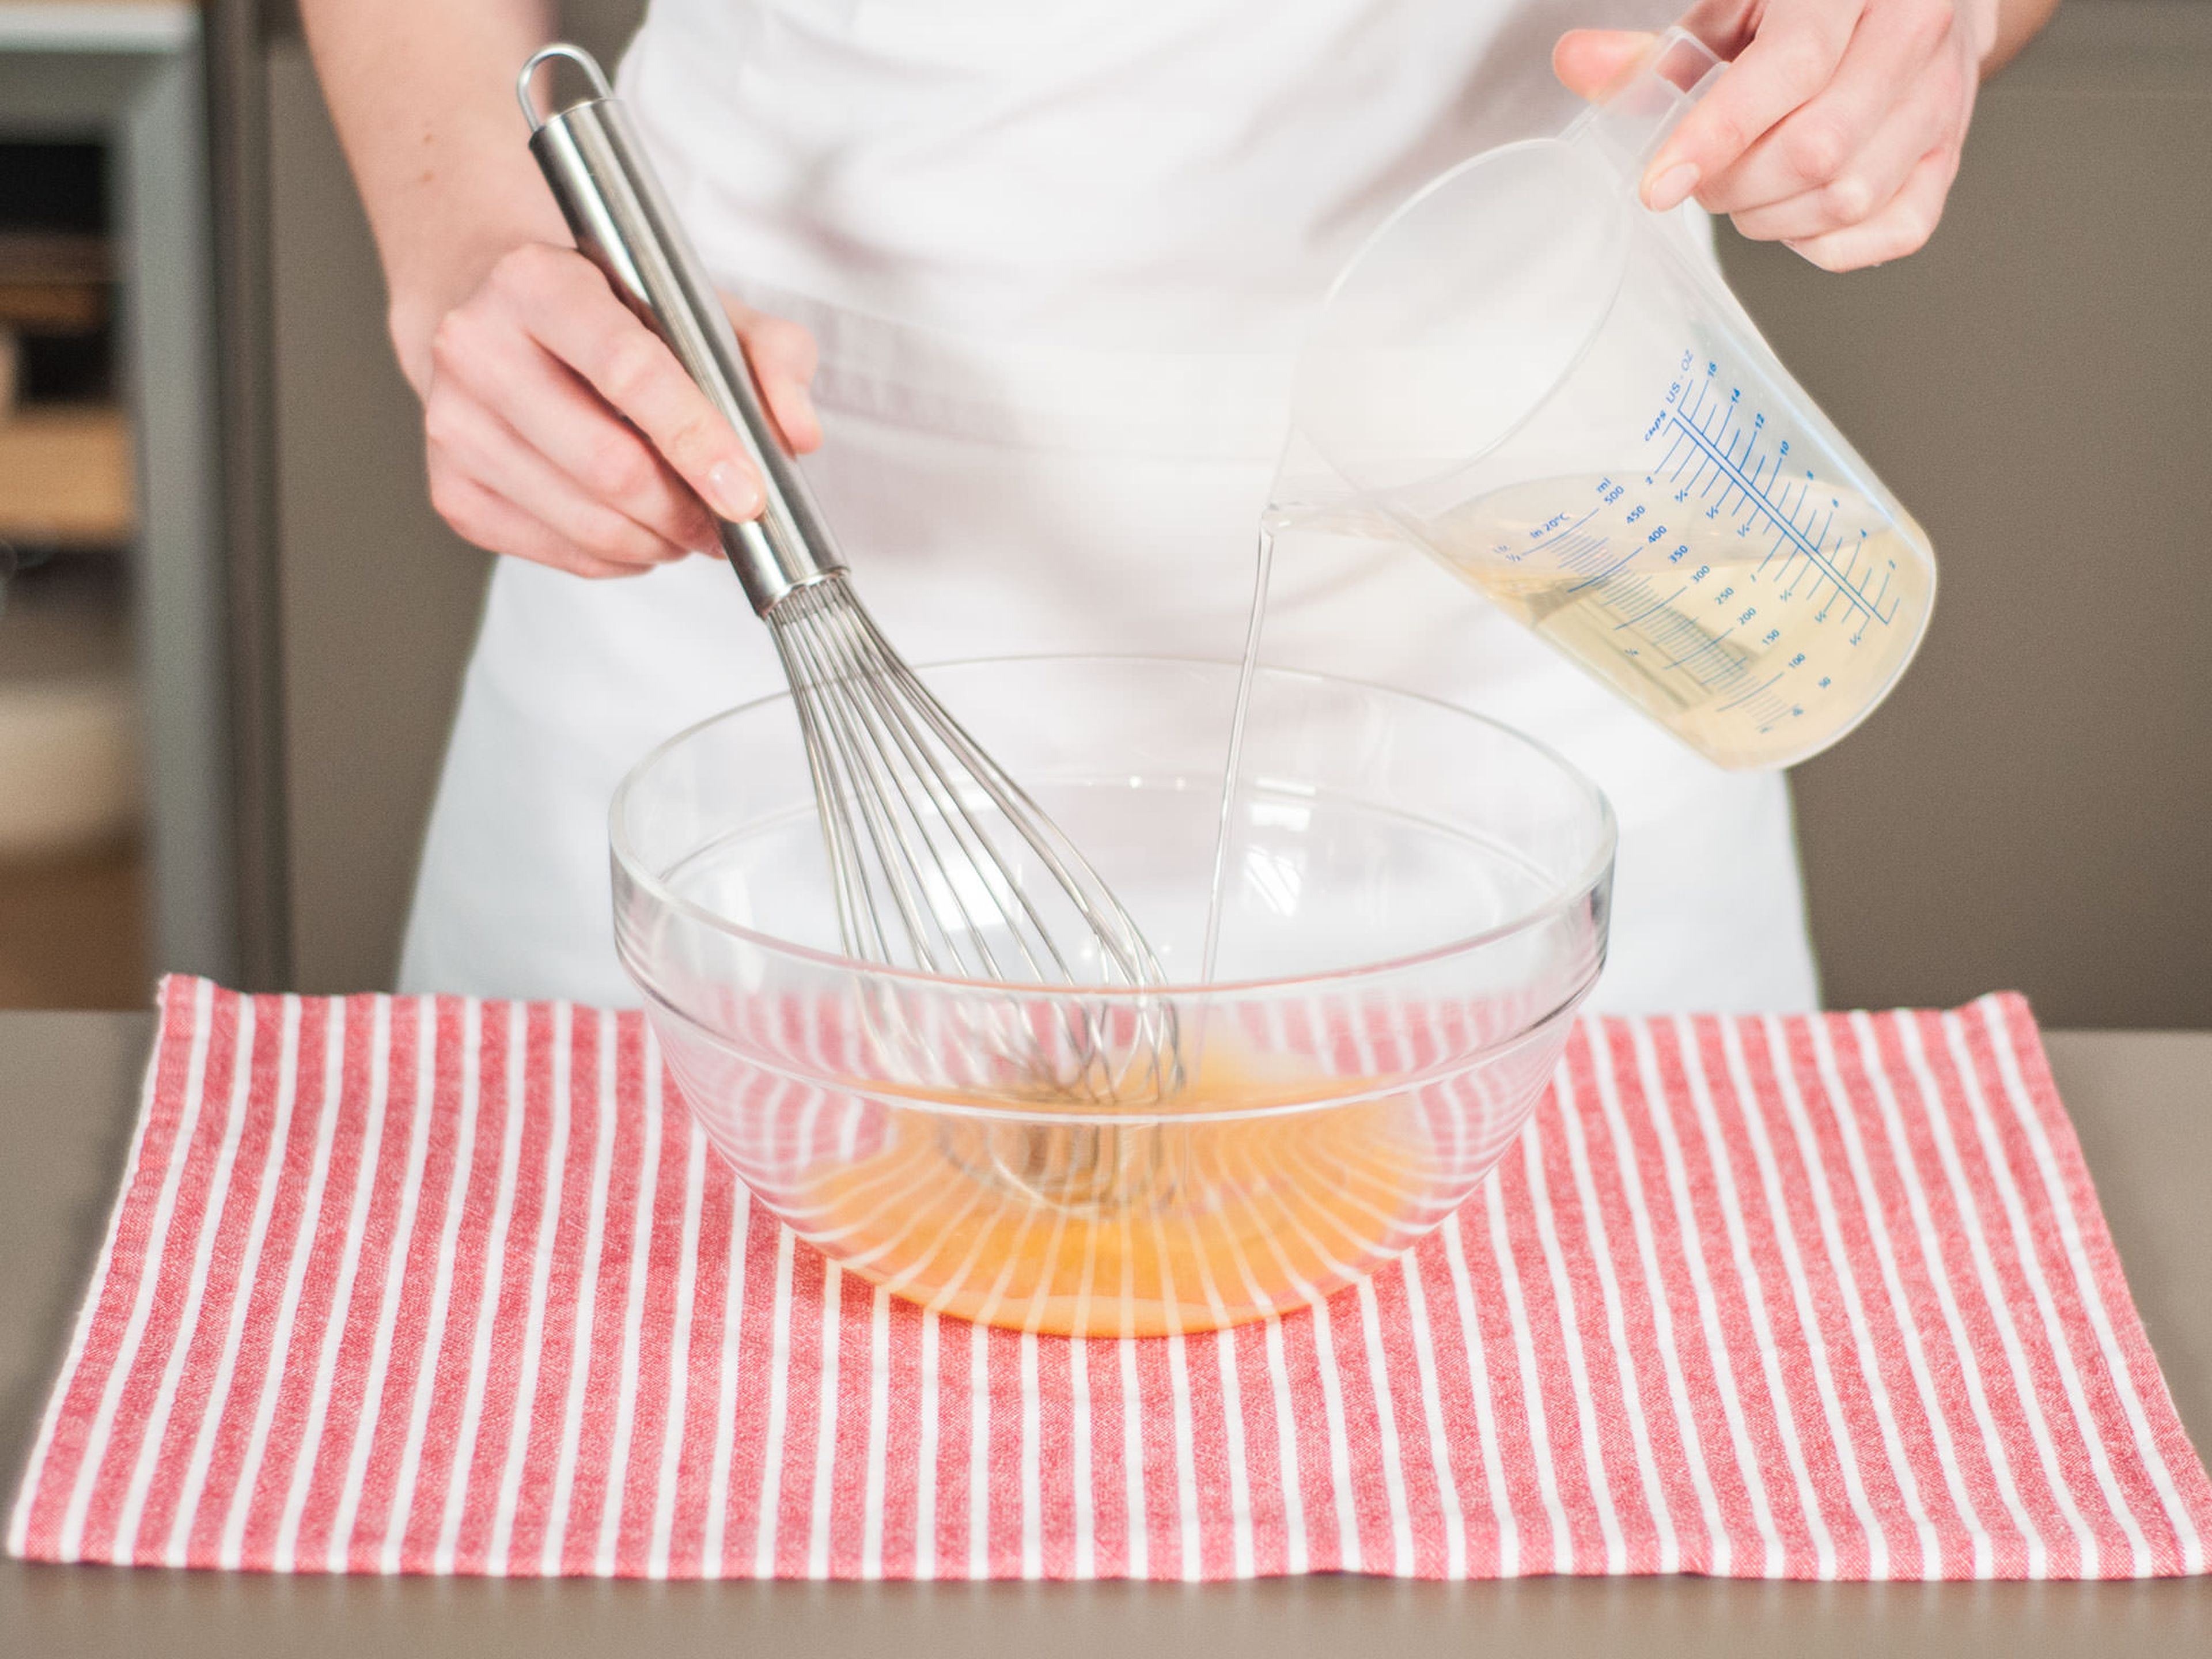 In a steady stream, add vegetable oil to egg yolks while stirring constantly. Whisk until fully incorporated. Then, season to taste with salt, pepper, and lemon juice.